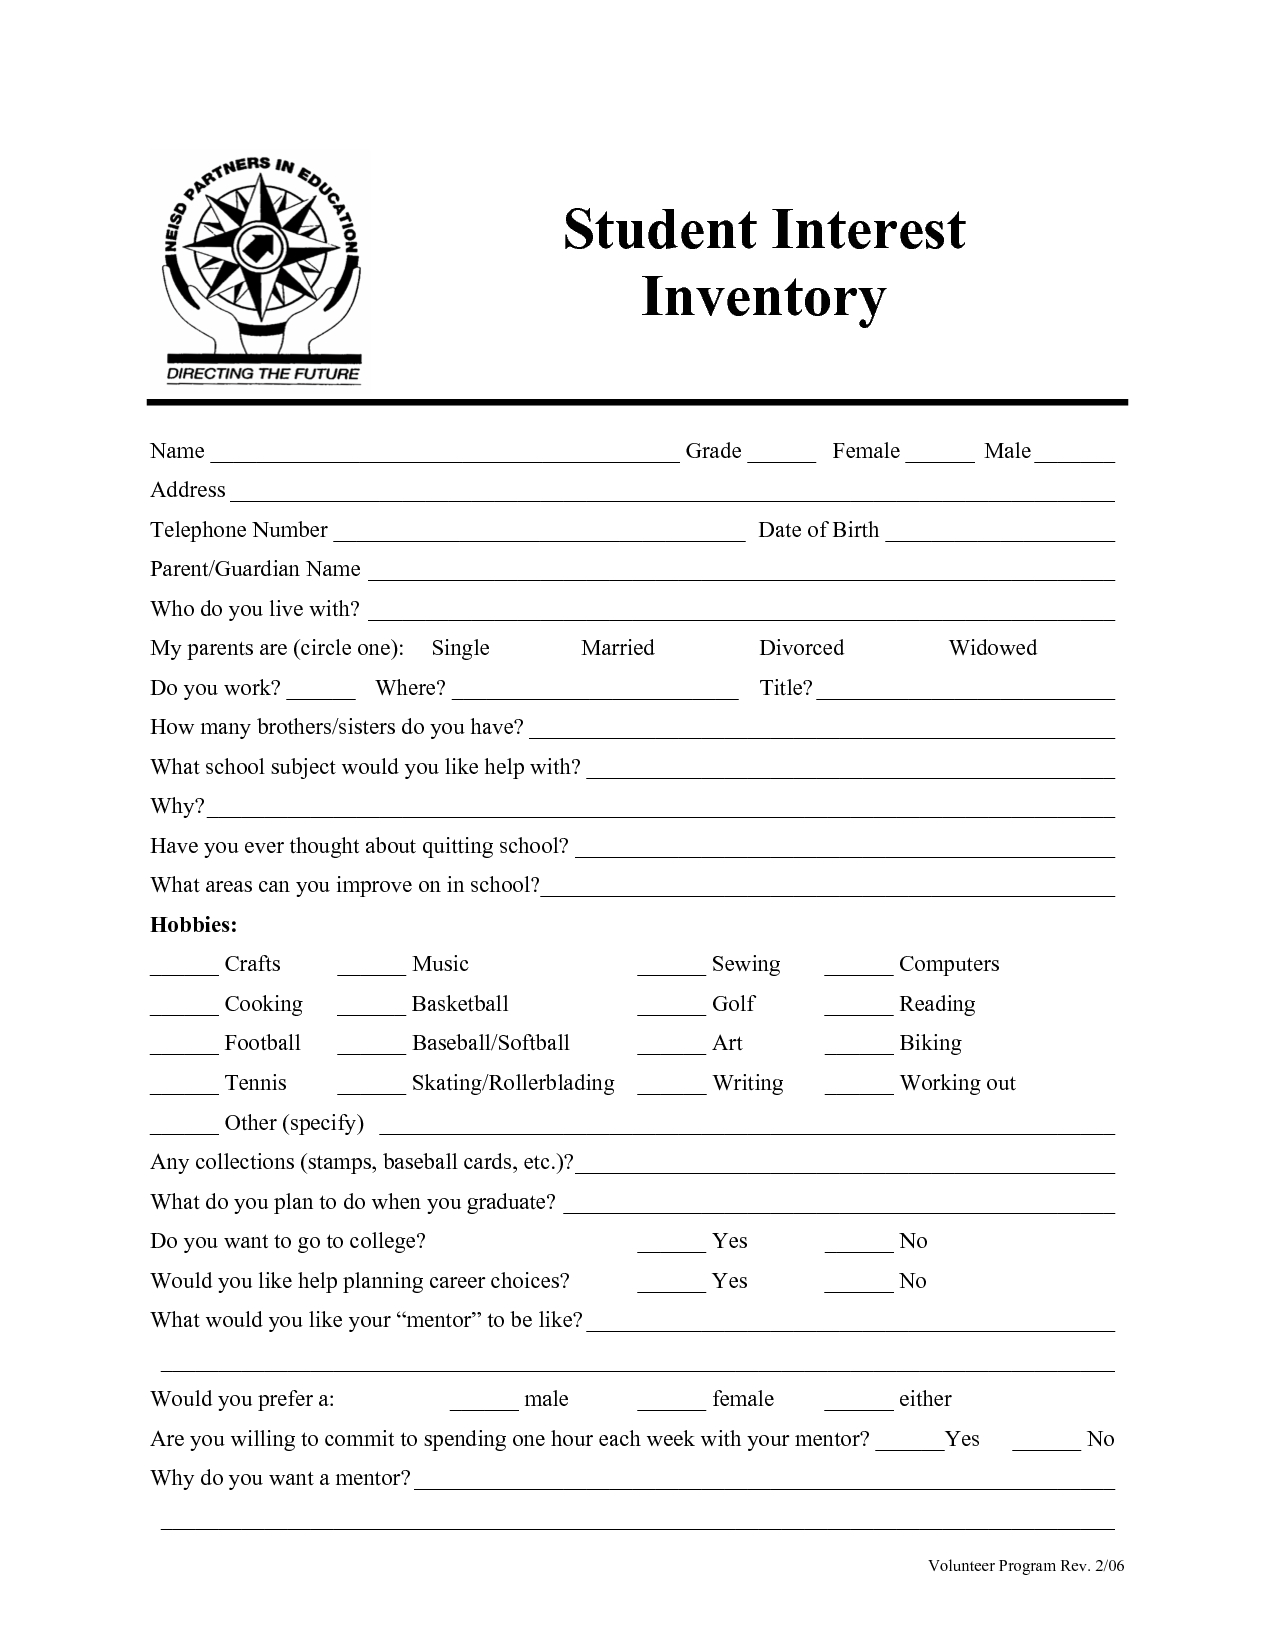 10-career-interest-survey-templates-in-google-docs-word-pages-pdf